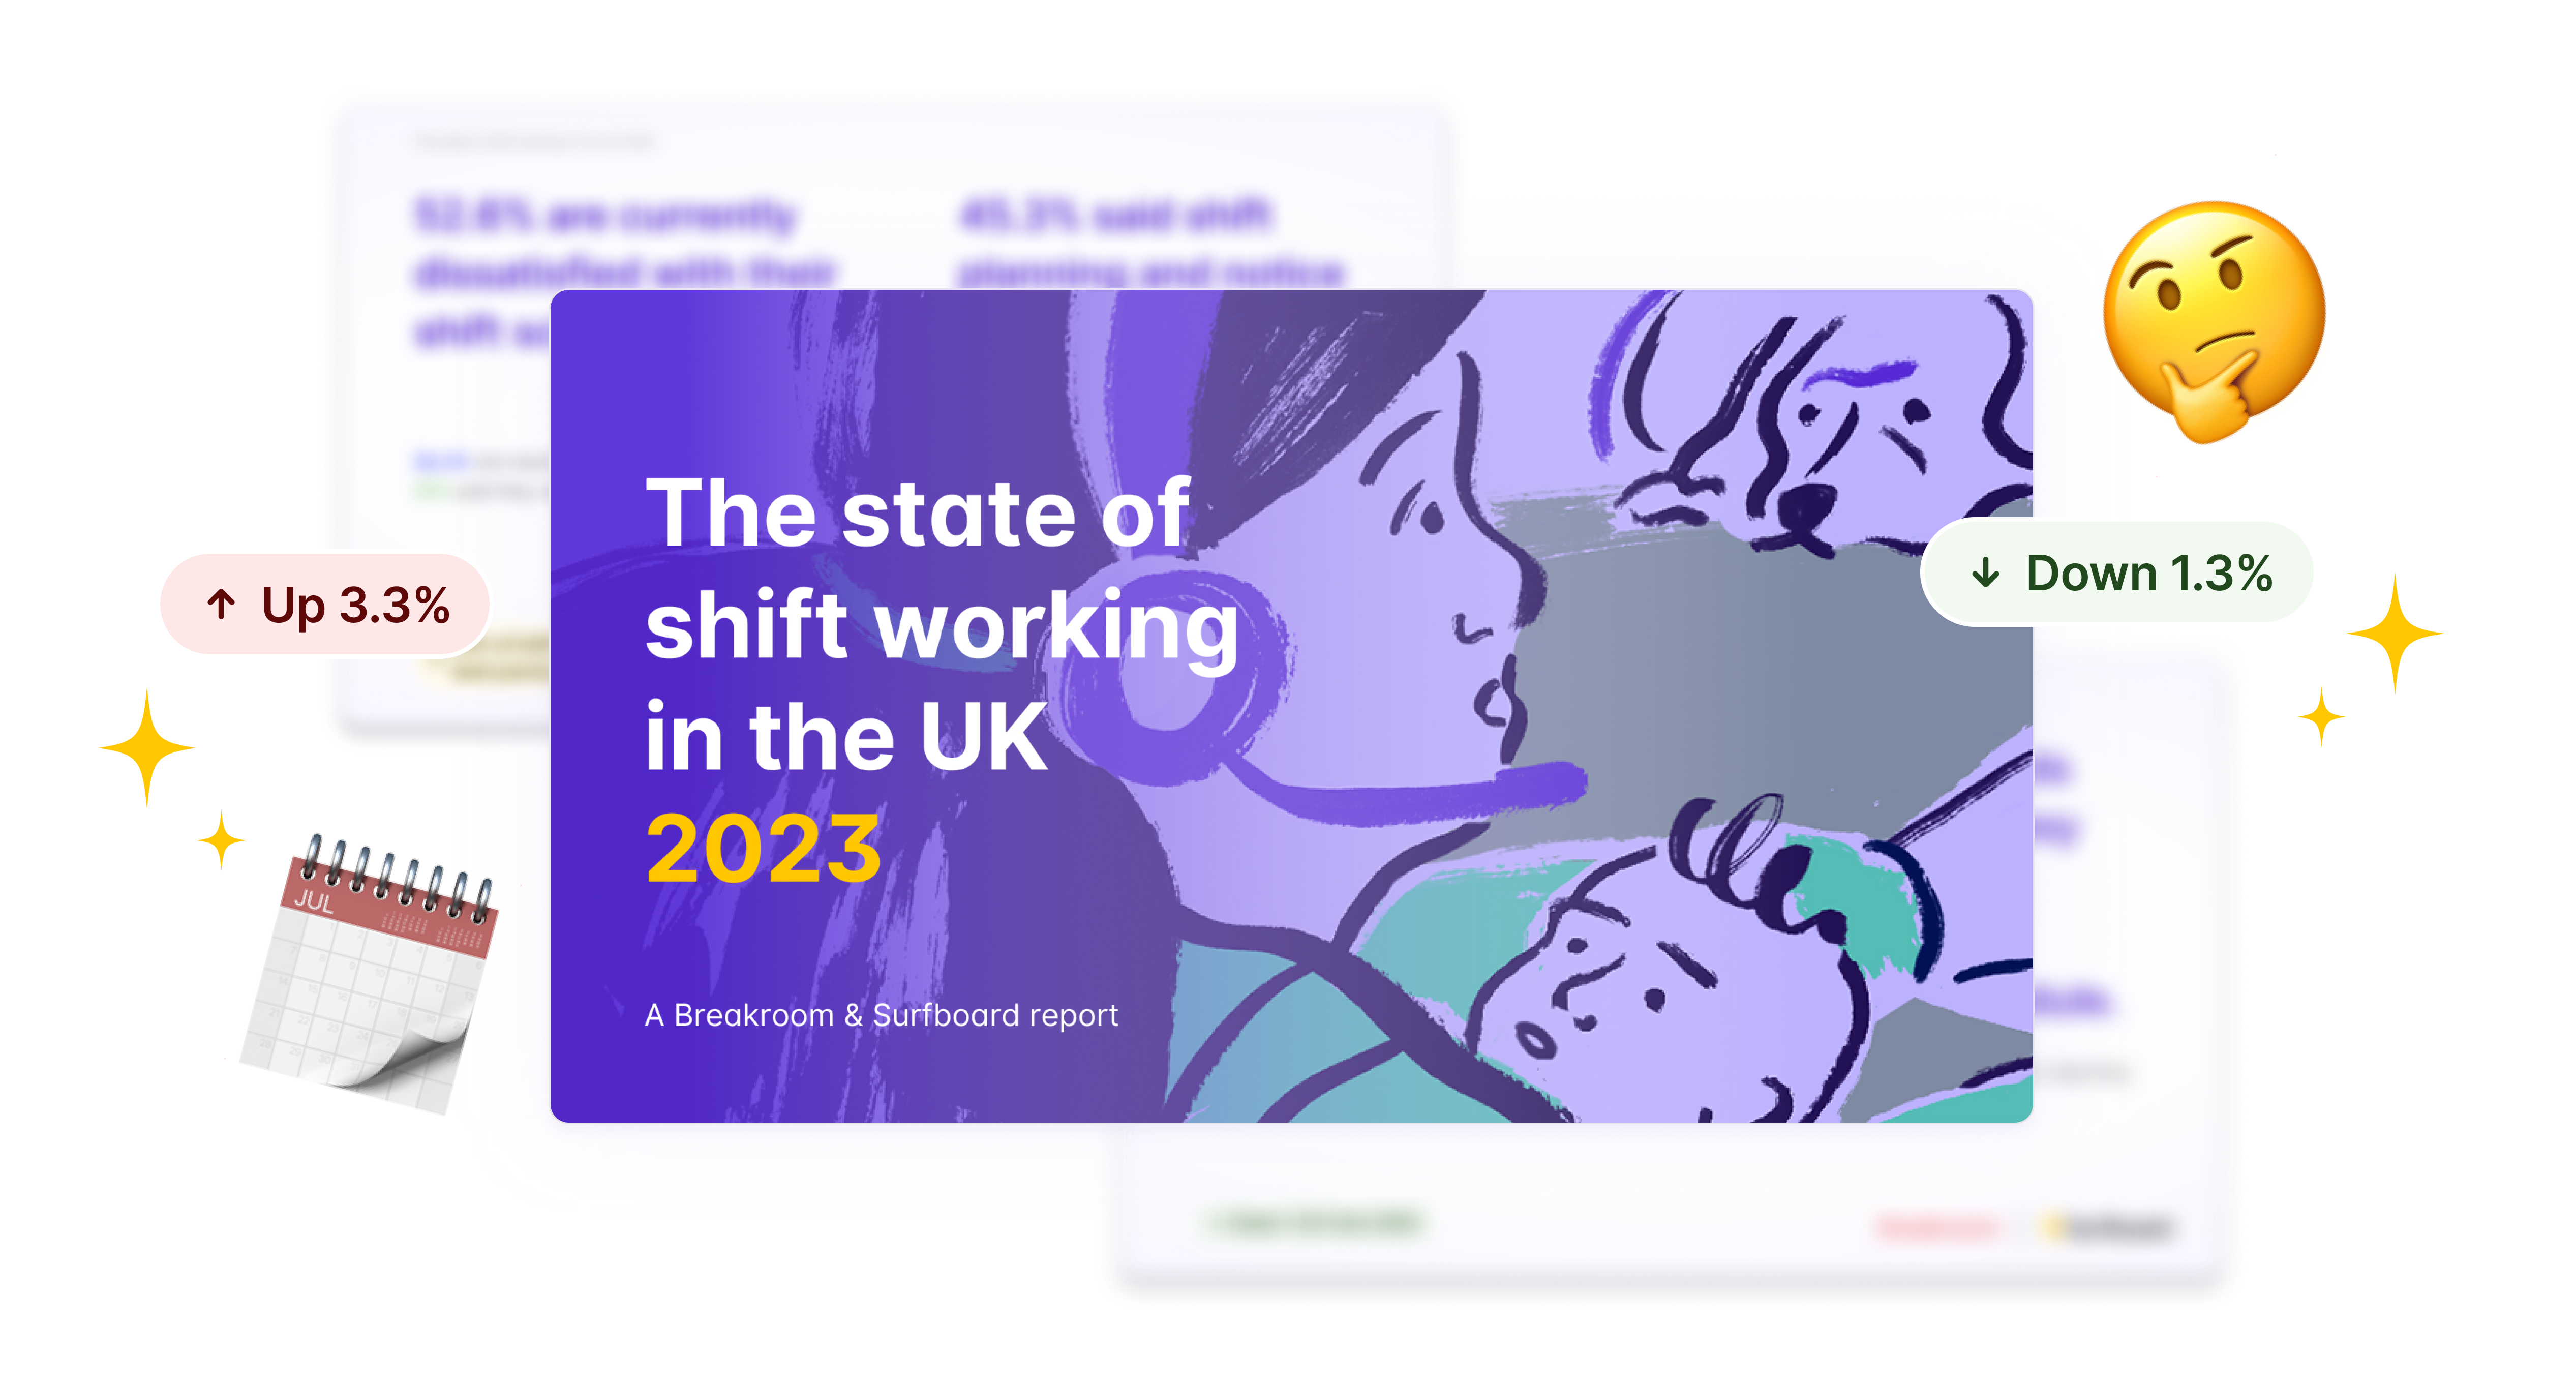 The state of shift working report